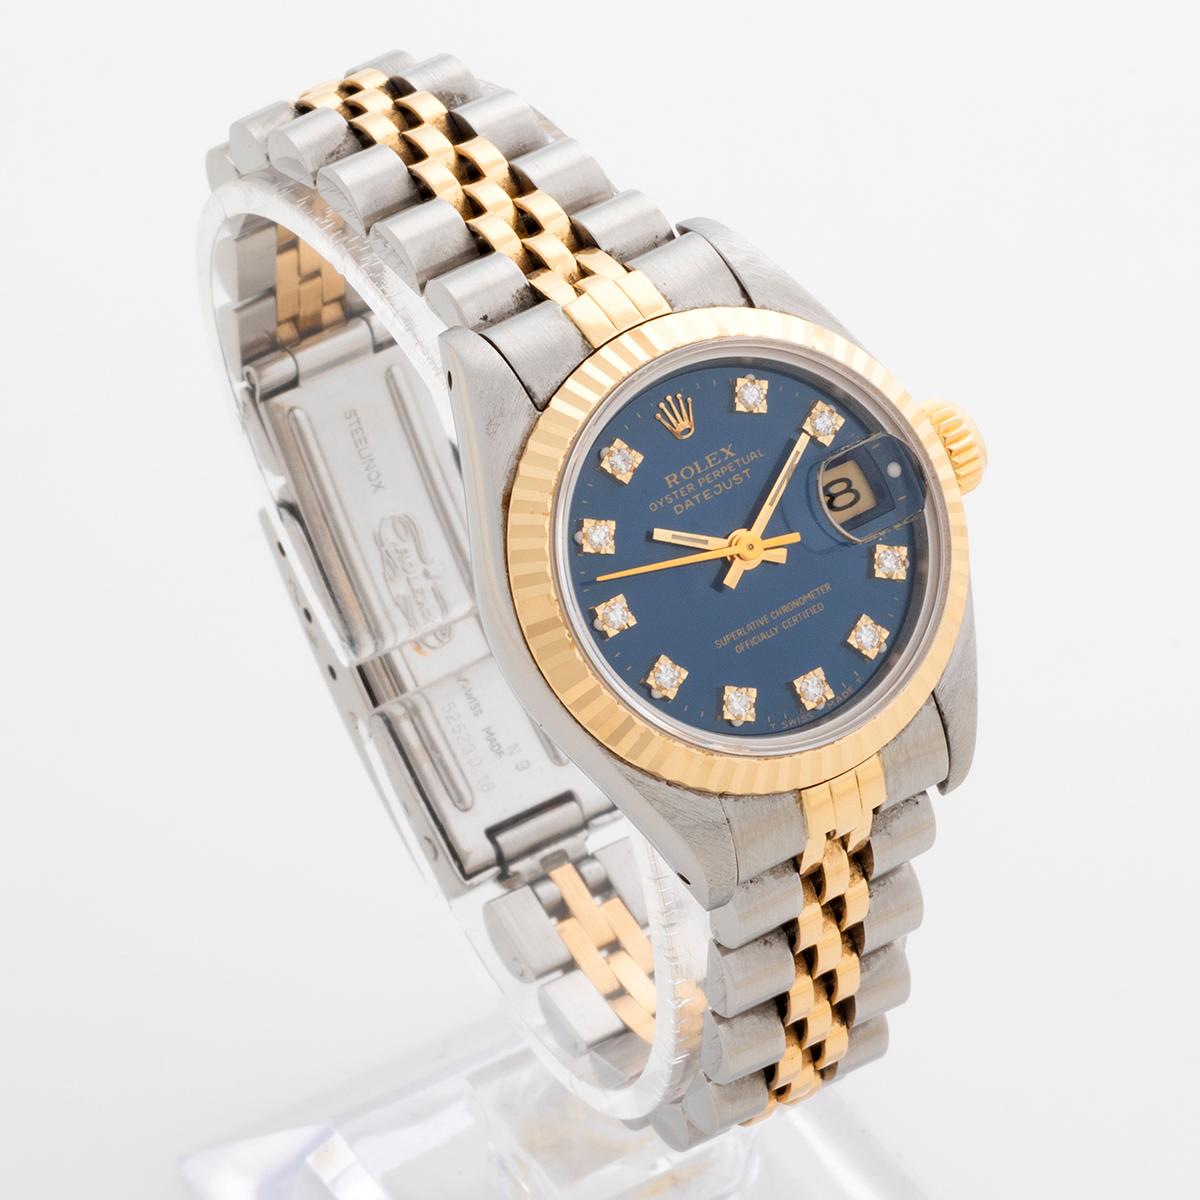 Our Rolex Lady Datejust , reference 69173 , features a factory diamond blue dial with stainless steel and 18k yellow gold case and bracelet. Presented in outstanding condition for its age, this has clearly been a cherished watch. Complete with